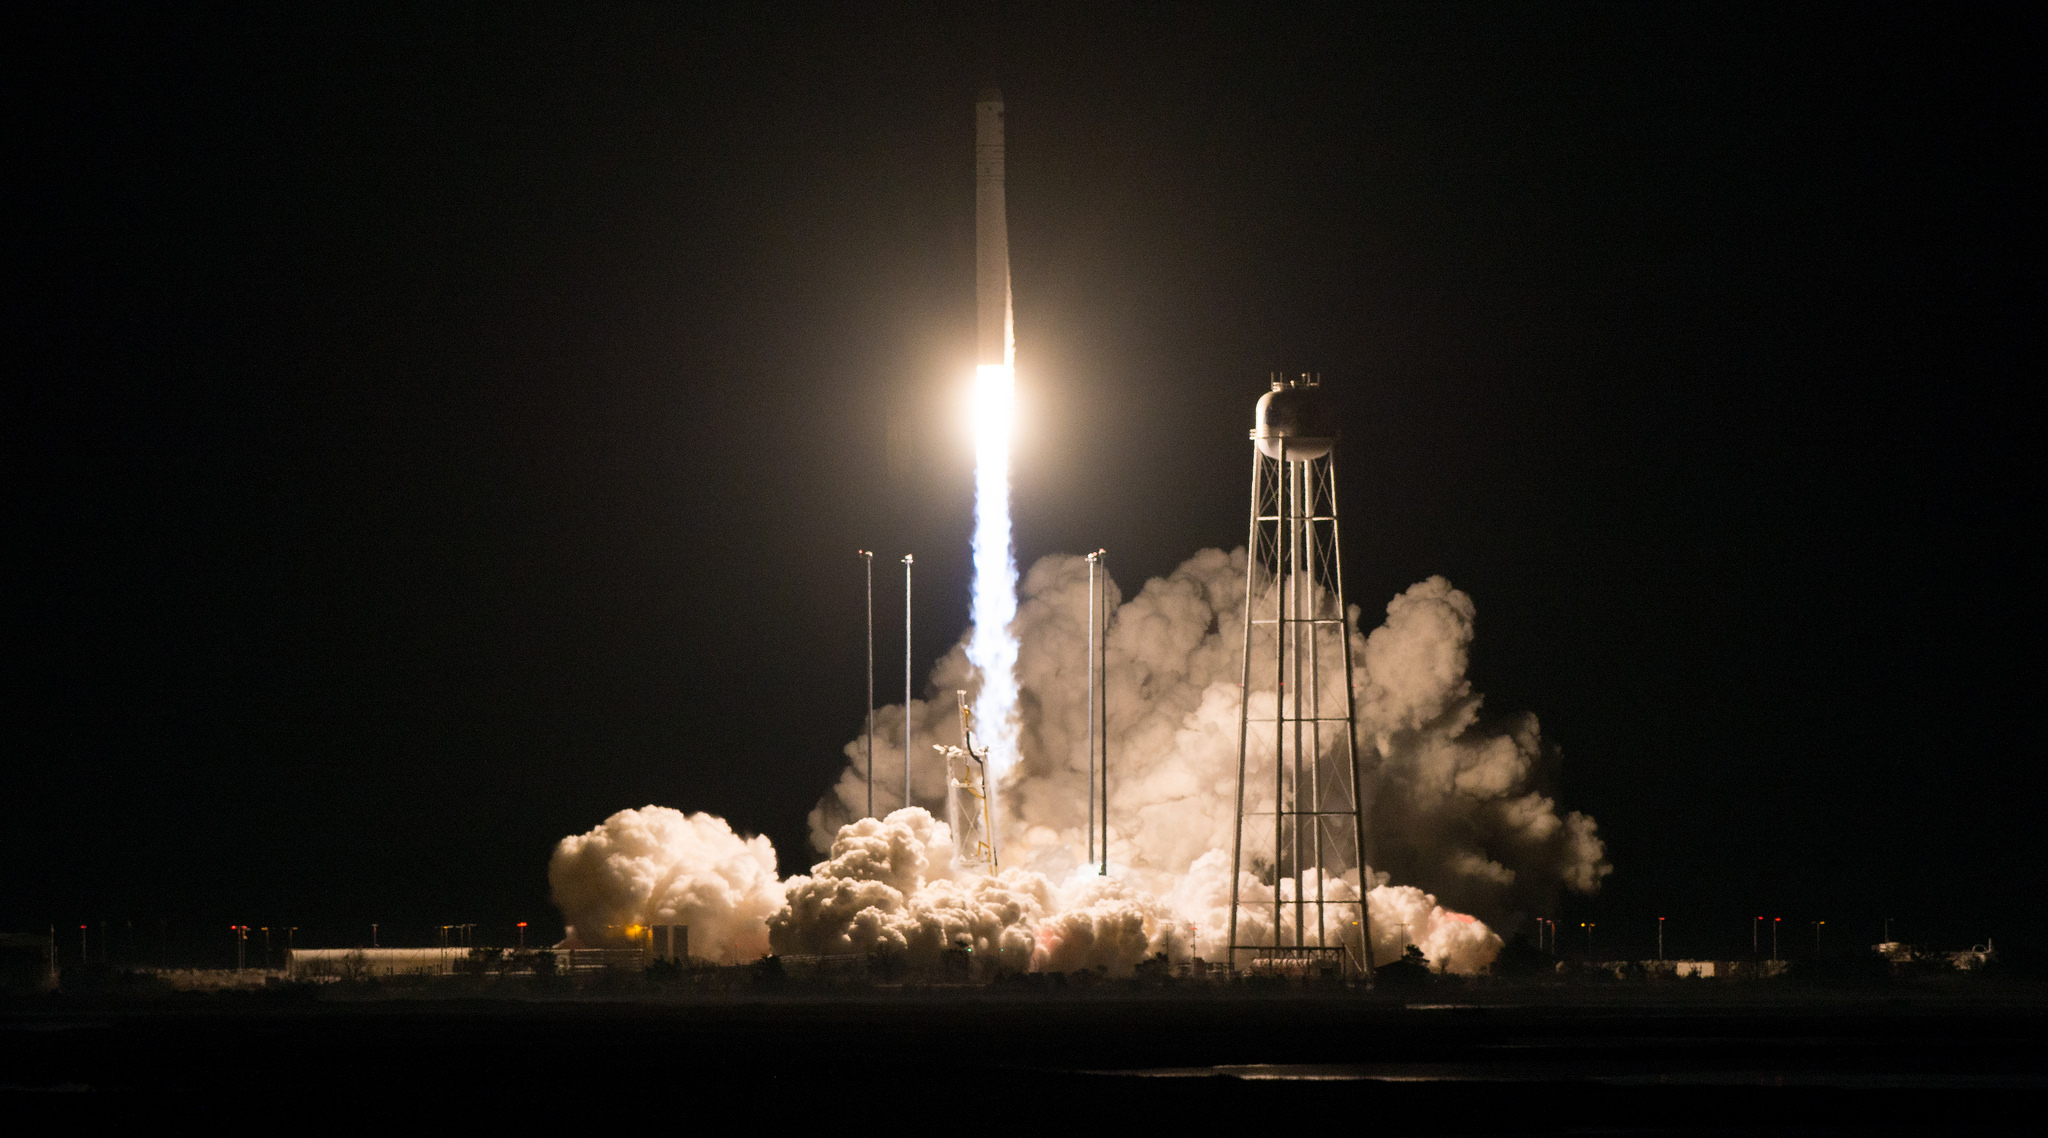 The Northrop Grumman Antares rocket, with Cygnus resupply spacecraft onboard, launches from Pad-0A, Saturday, Nov. 17, 2018